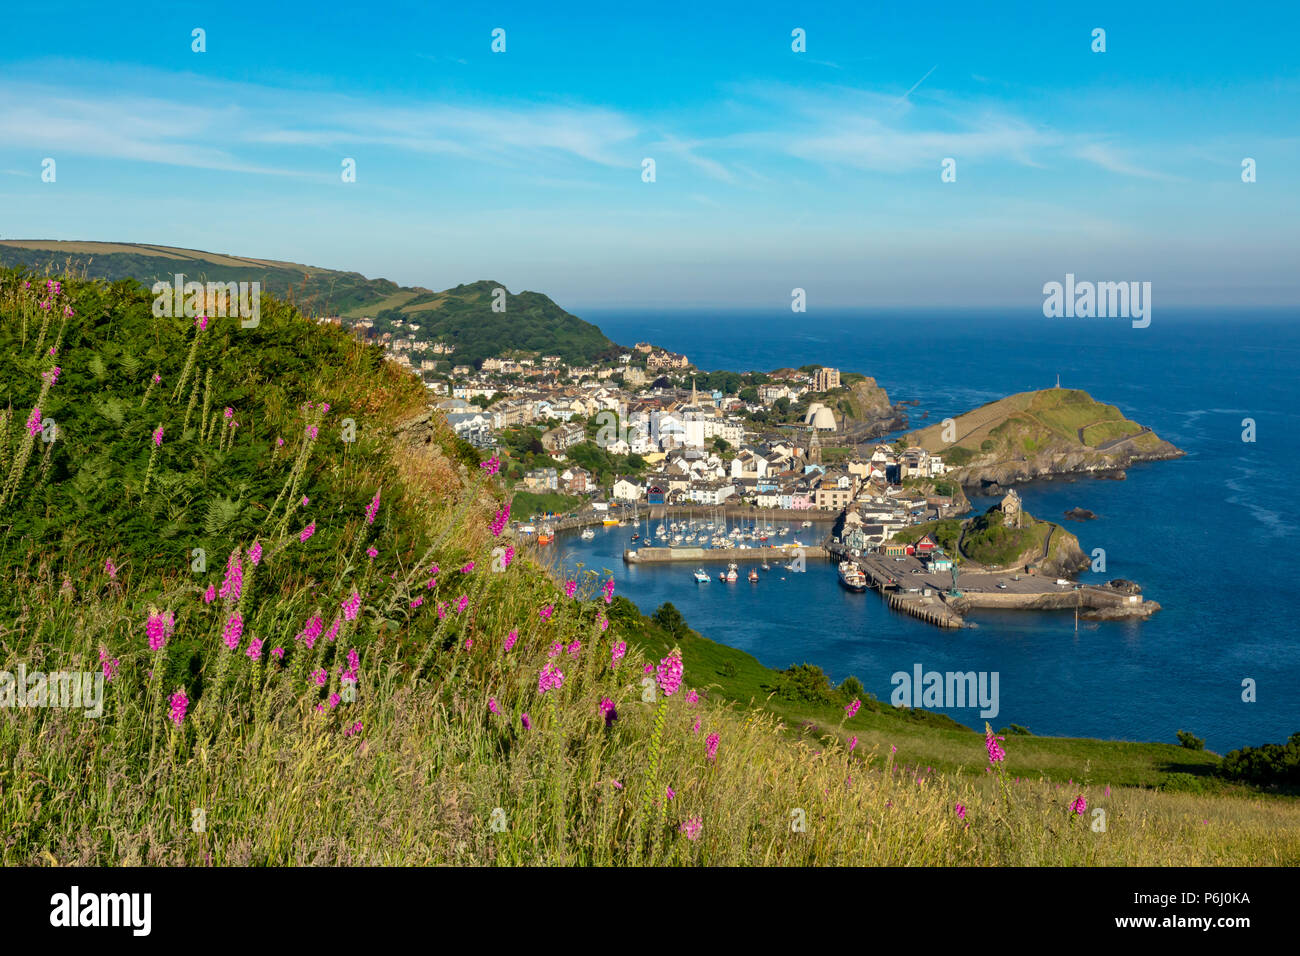 Ilfracombe Devon England June 27, 2018 View overlooking Ilfracombe from the south west coast path Stock Photo